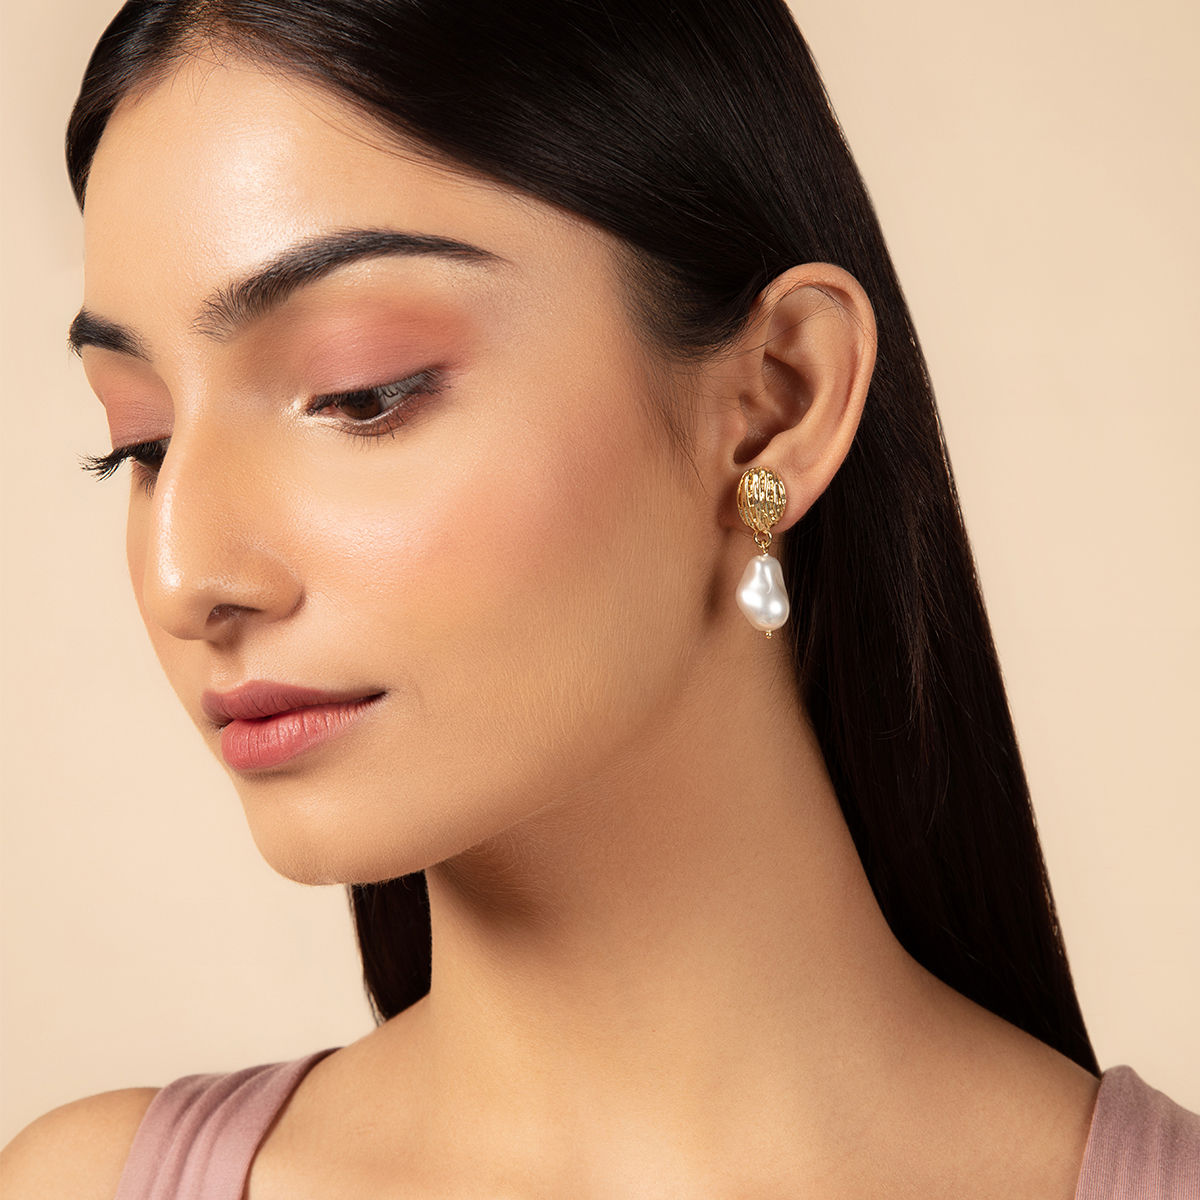 MIXT by Nykaa Fashion Pearl Stud With Peach Shaped Drop Earrings Buy MIXT  by Nykaa Fashion Pearl Stud With Peach Shaped Drop Earrings Online at Best  Price in India  Nykaa